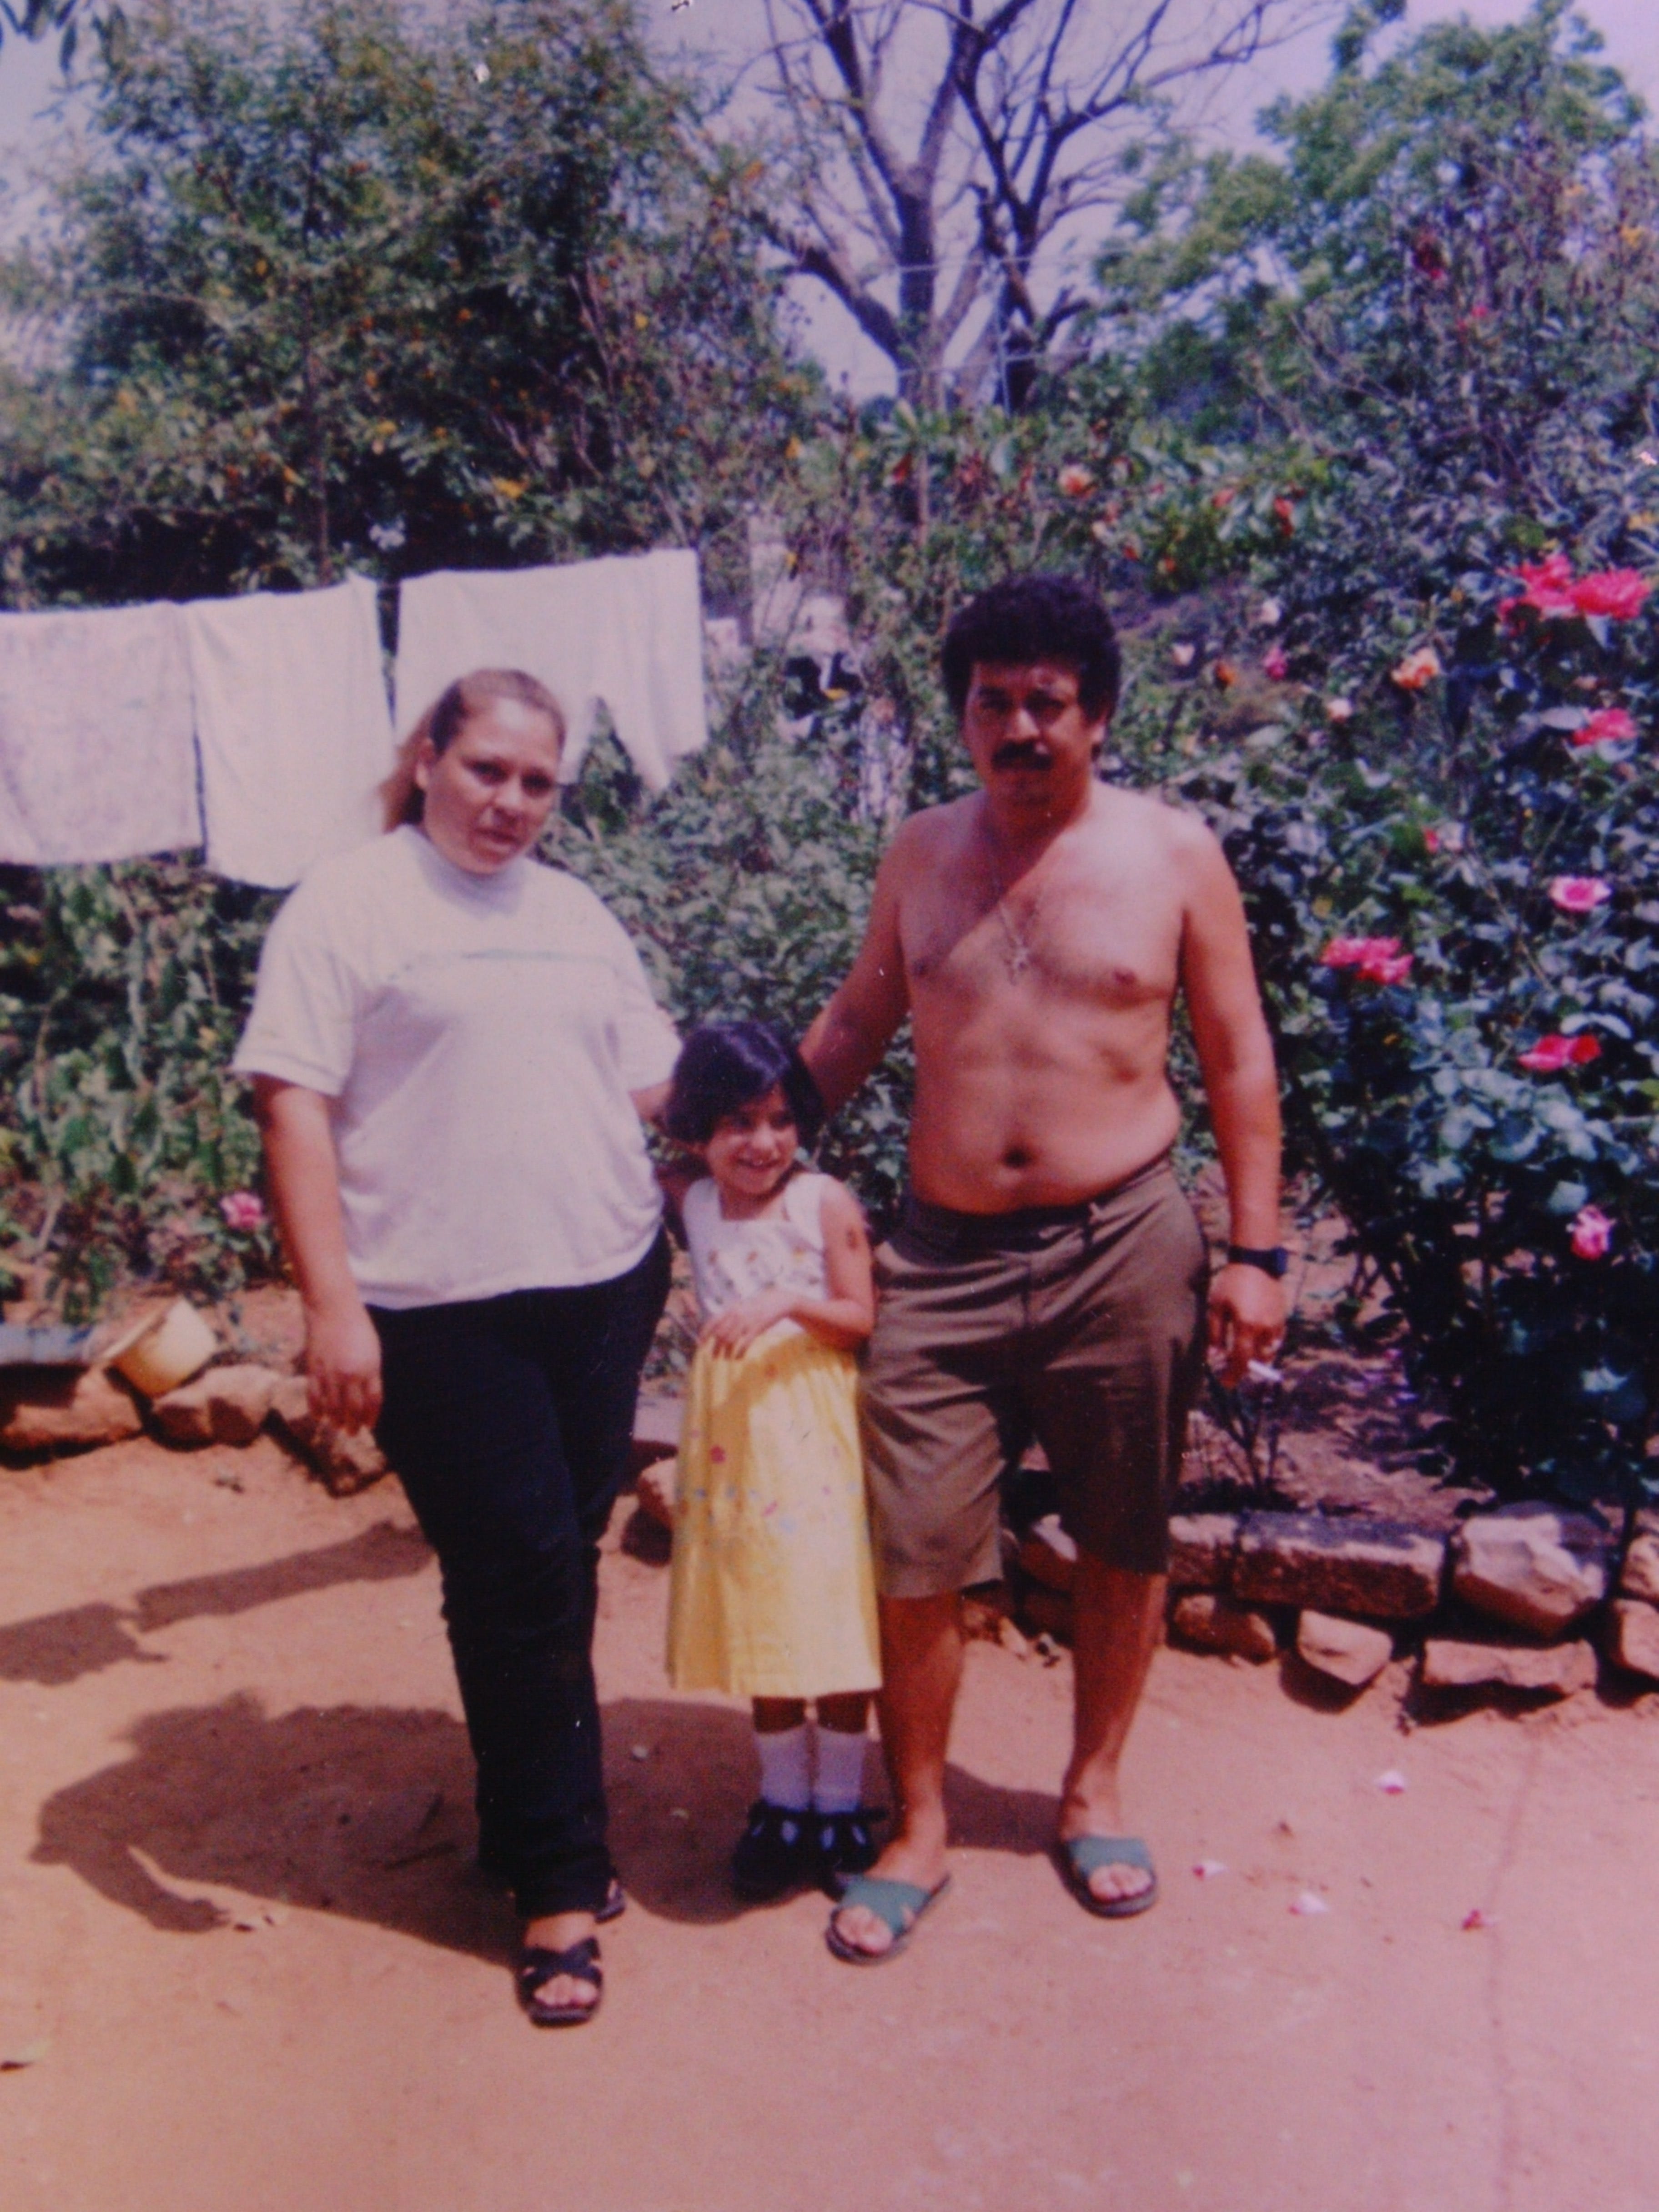 A photo of a man, a woman and a girl found on the body of a Latino man located in field in Seeley, CA on July 7, 2000. The deceased man appears to be the guy in the photo. His name may be Rigoberto Chabes Gomes. Photo from John Doe Case #00-108.